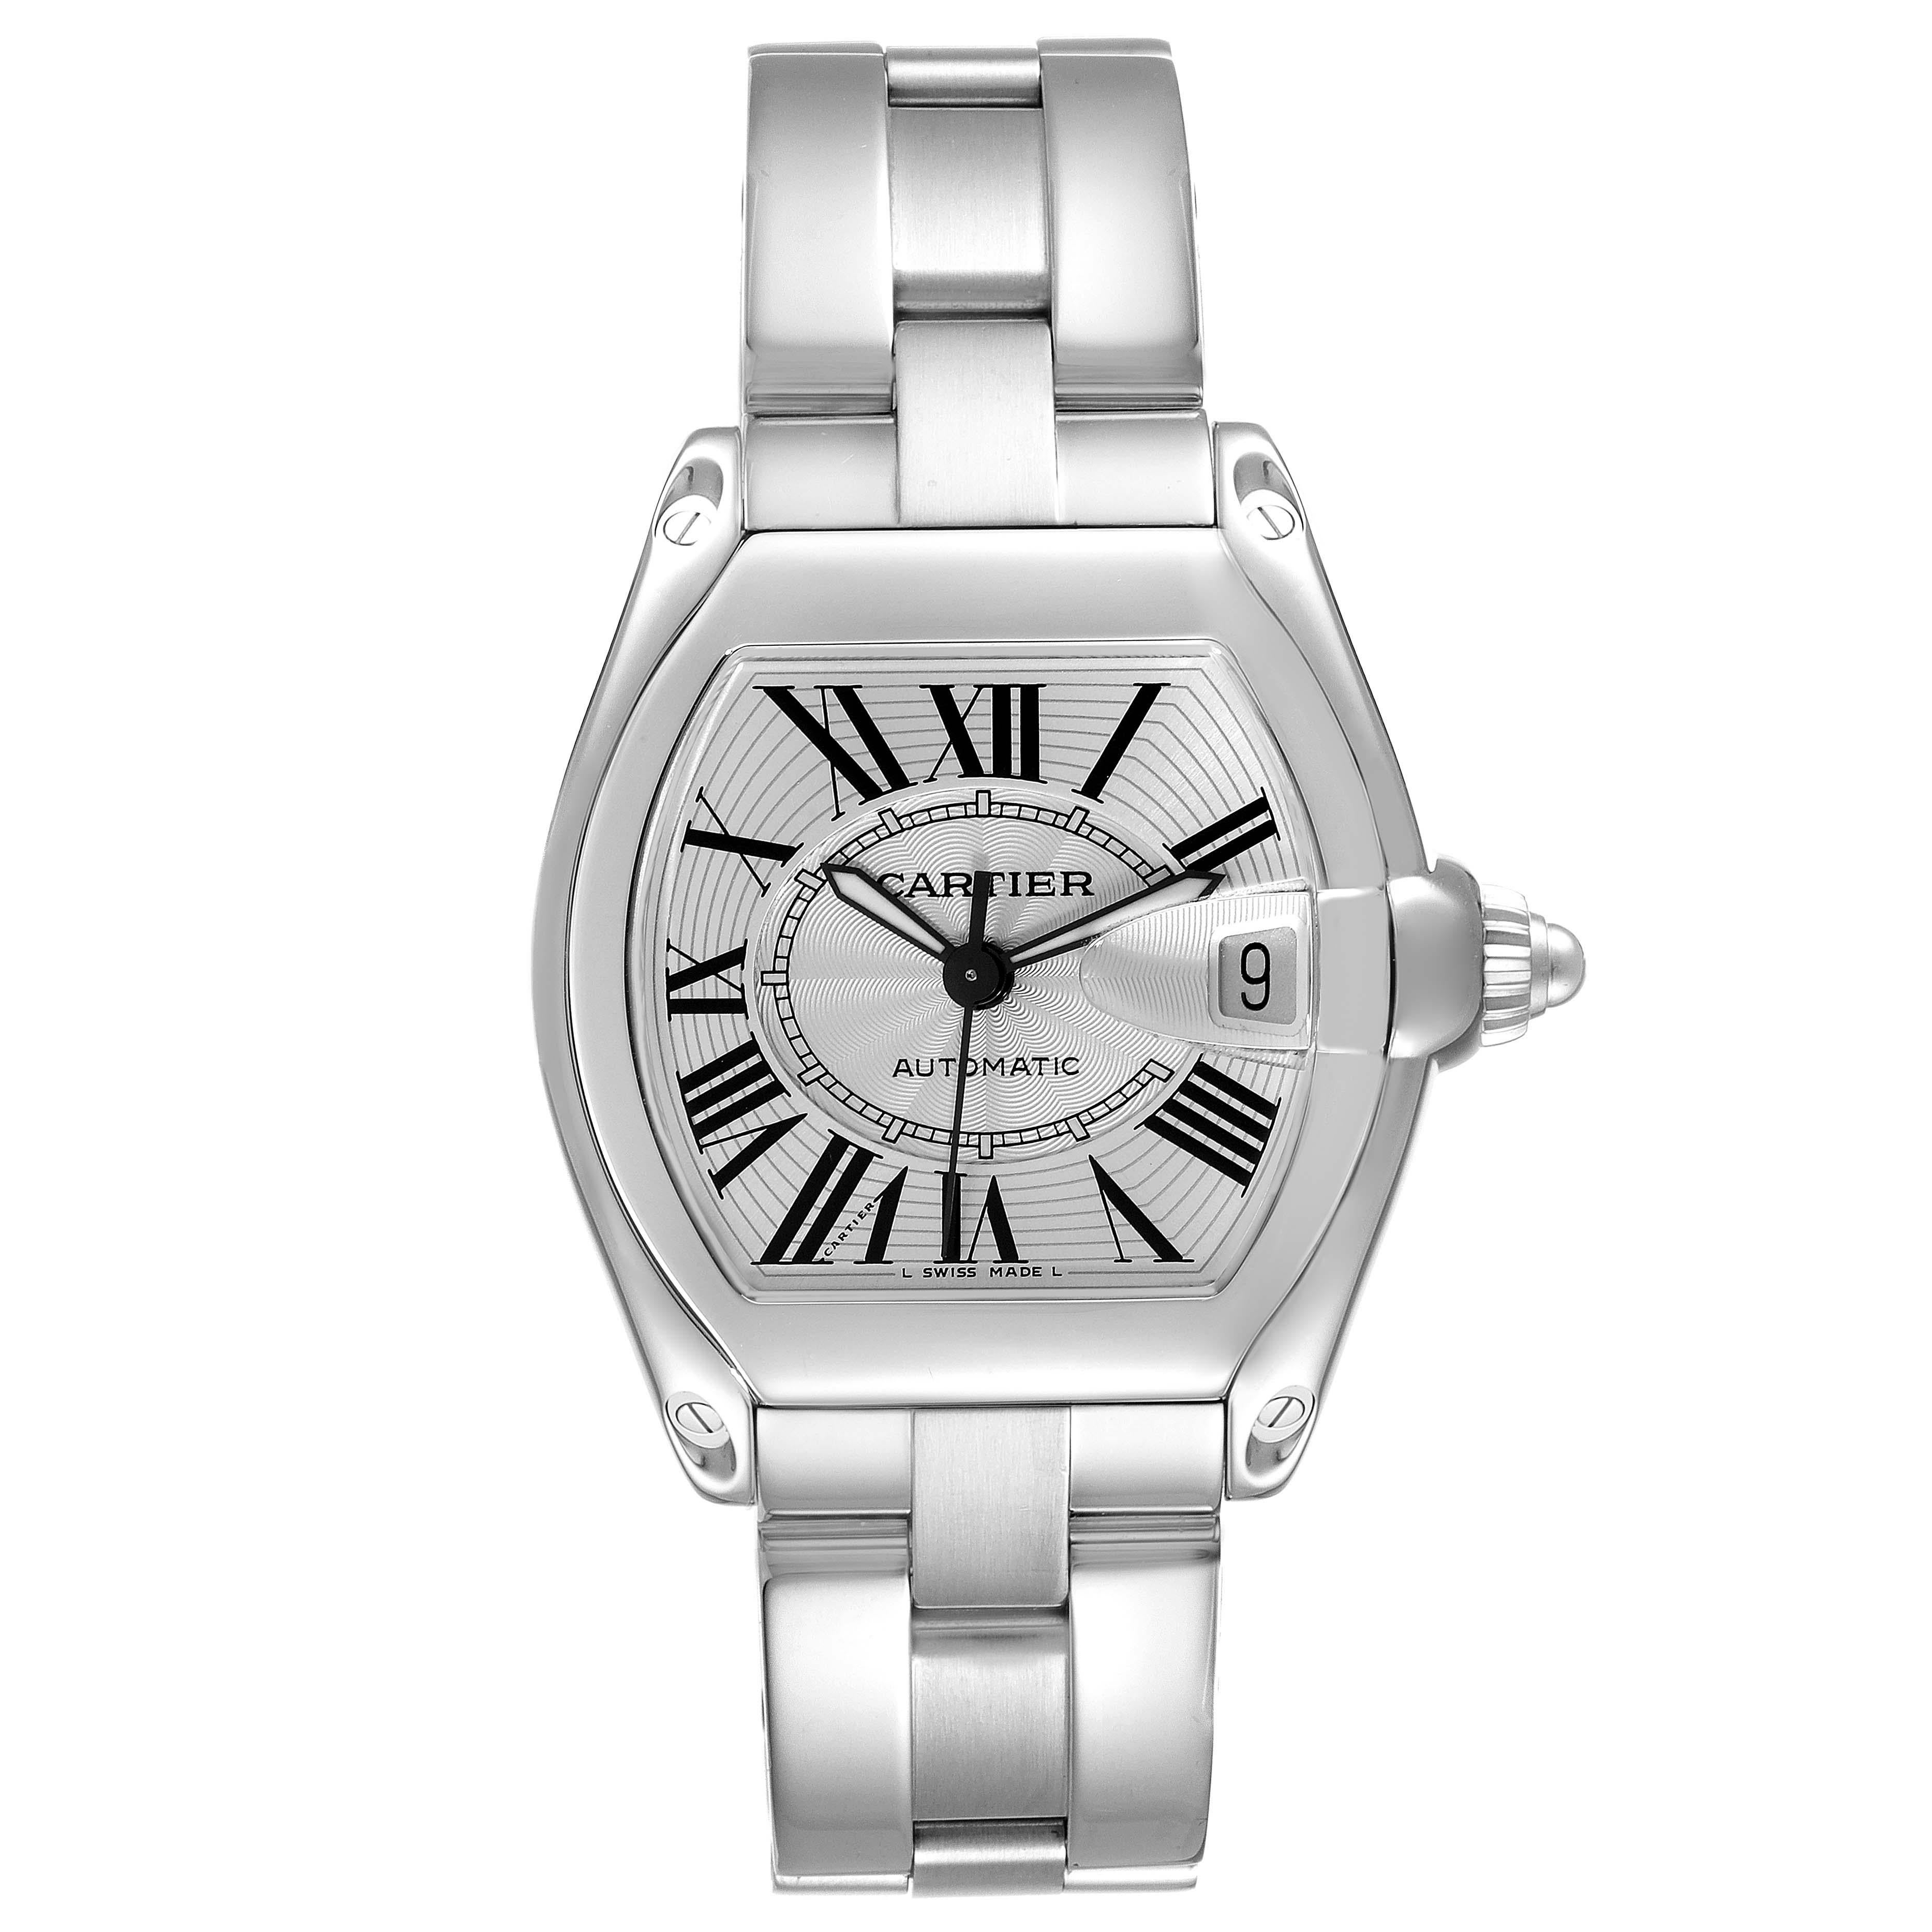 Cartier Roadster Silver Dial Steel Mens Watch W62000V3. Automatic self-winding movement. Stainless steel tonneau shaped case 38 x 43mm. . Scratch resistant sapphire crystal with cyclops magnifying glass. Silver sunray dial with black Roman numerals.